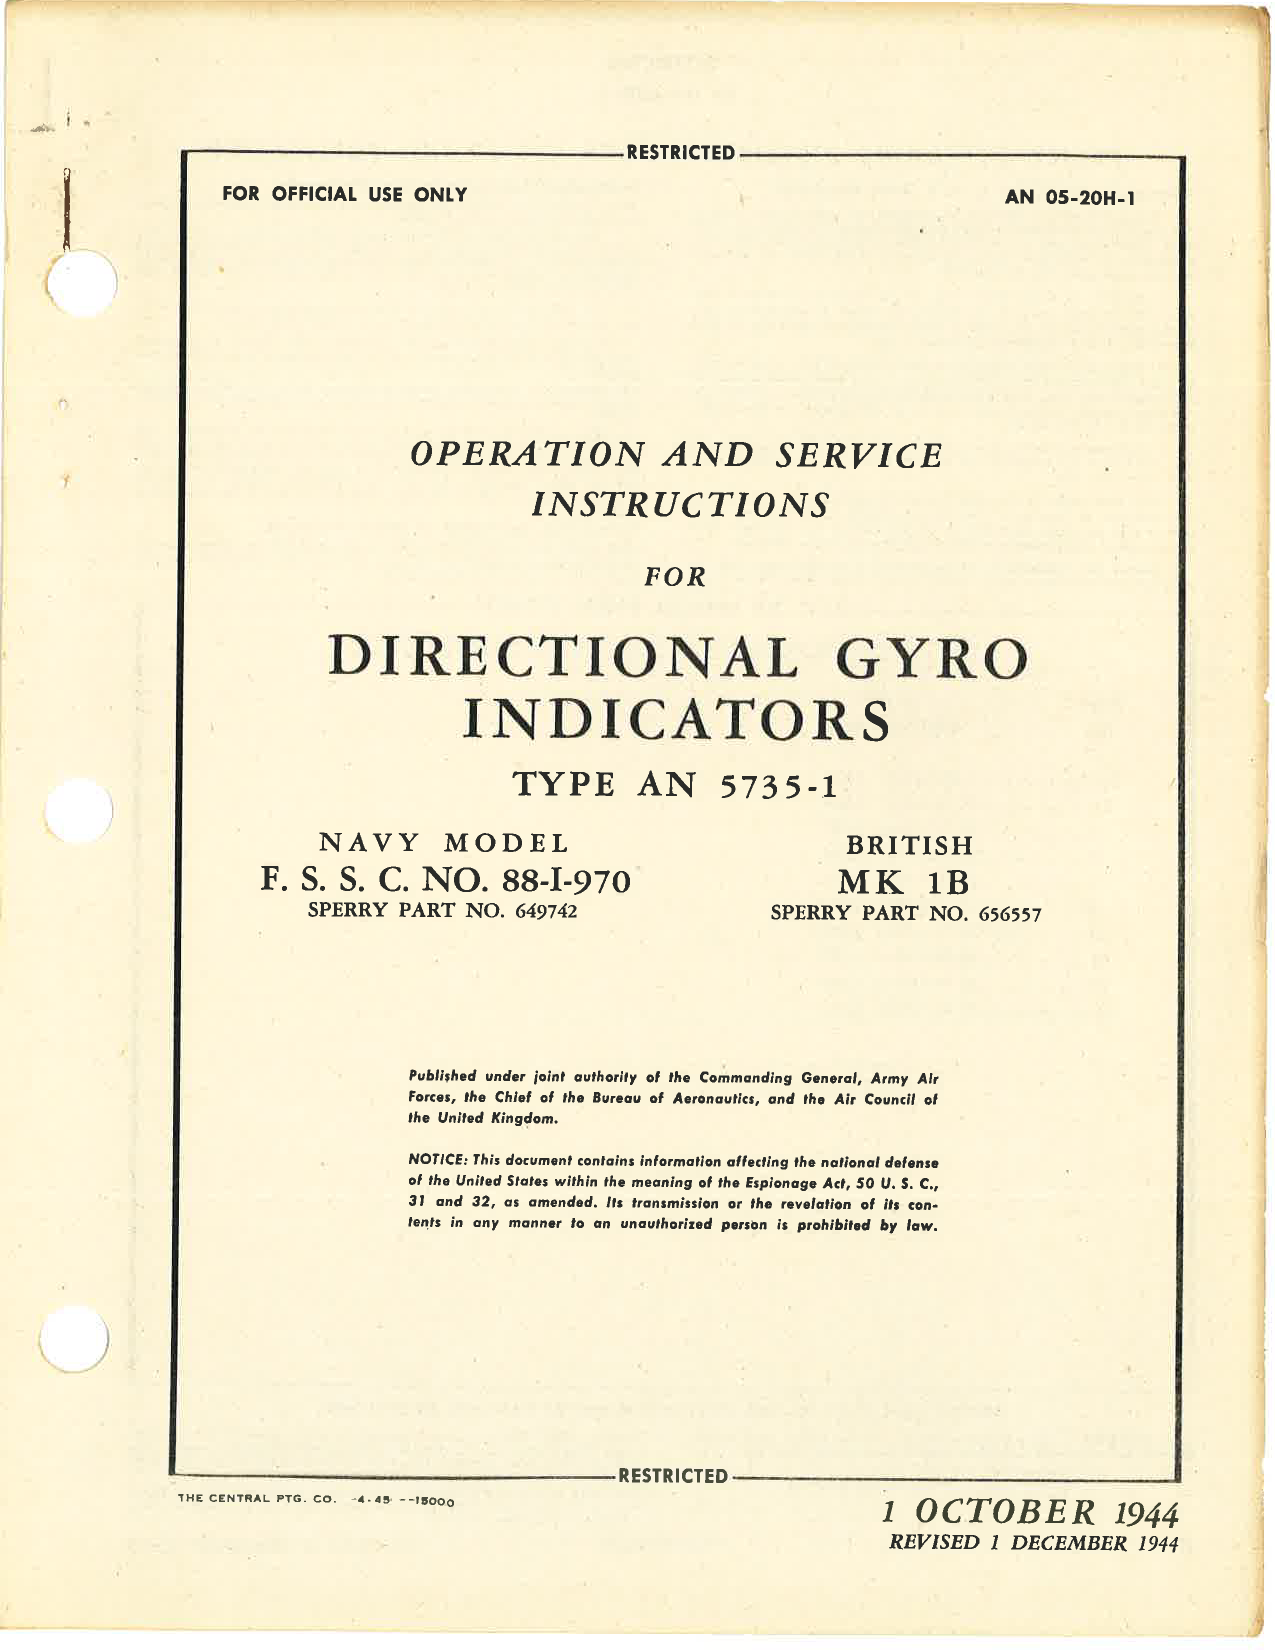 Sample page 1 from AirCorps Library document: Operation and Service Instructions for Directional Gyro Indicators Type AN 5735-1